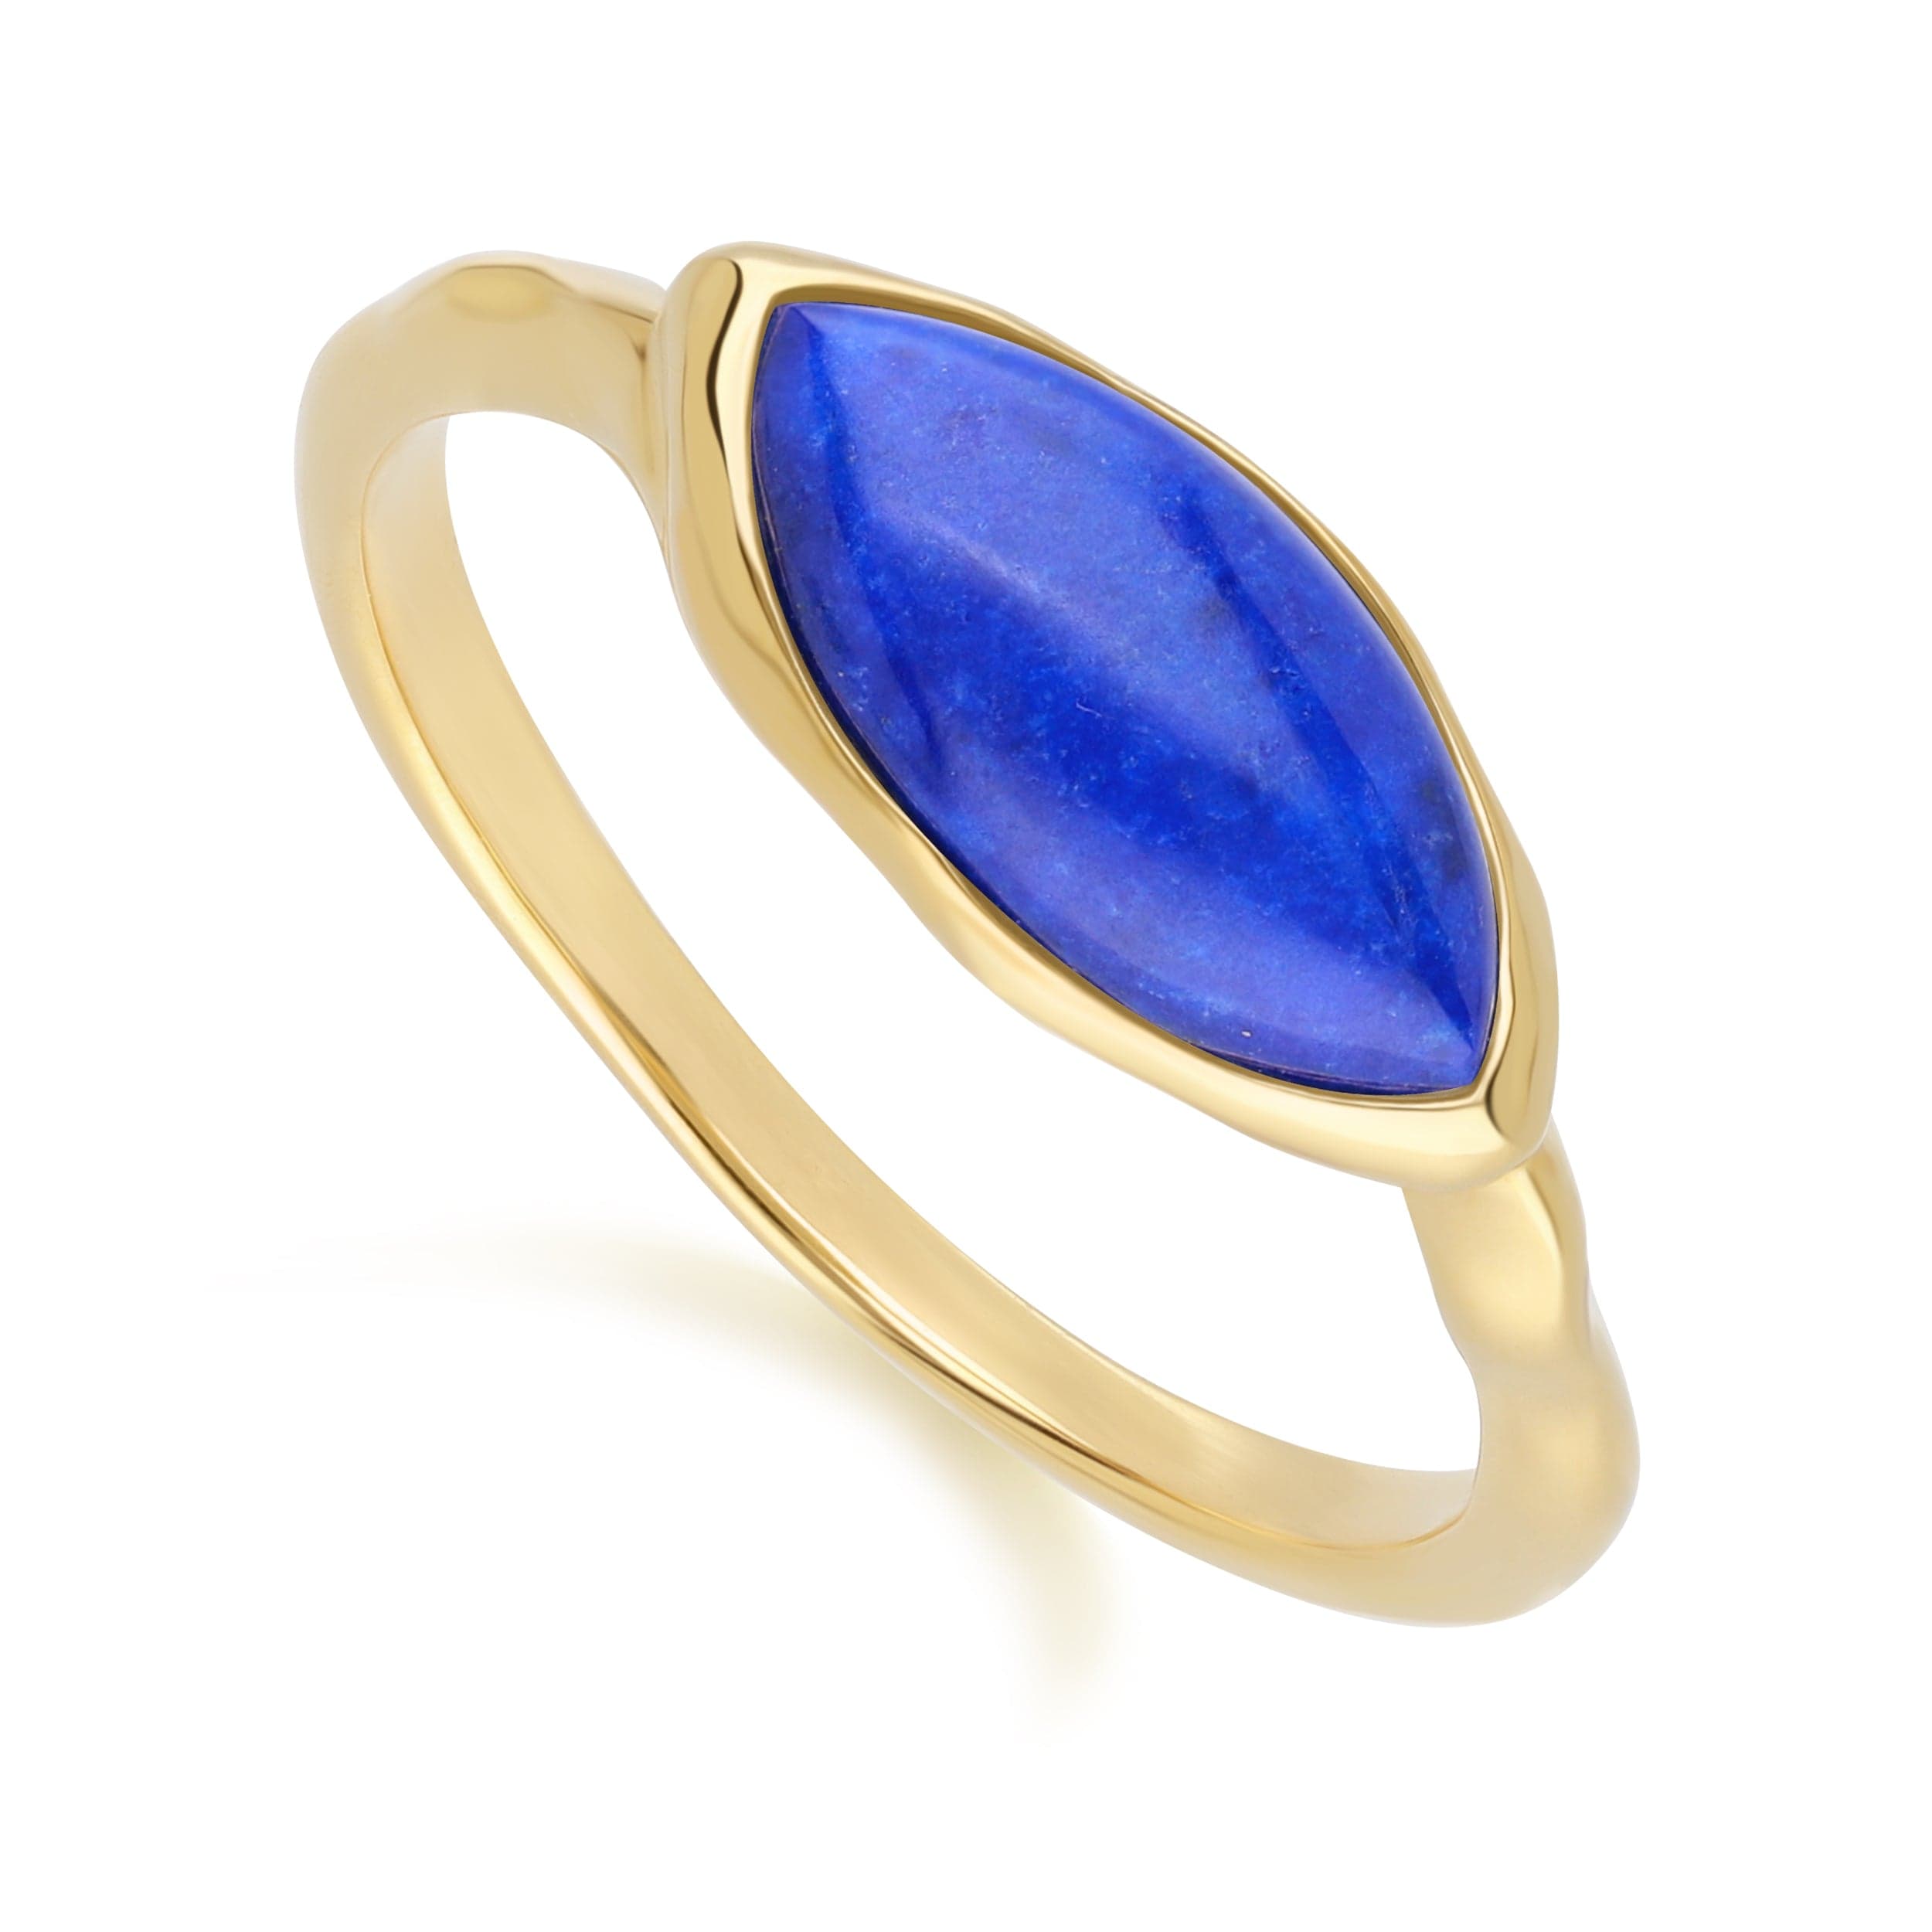 Irregular Marquise Lapis Lazuli Ring In 18ct Gold Plated SterlIng Silver